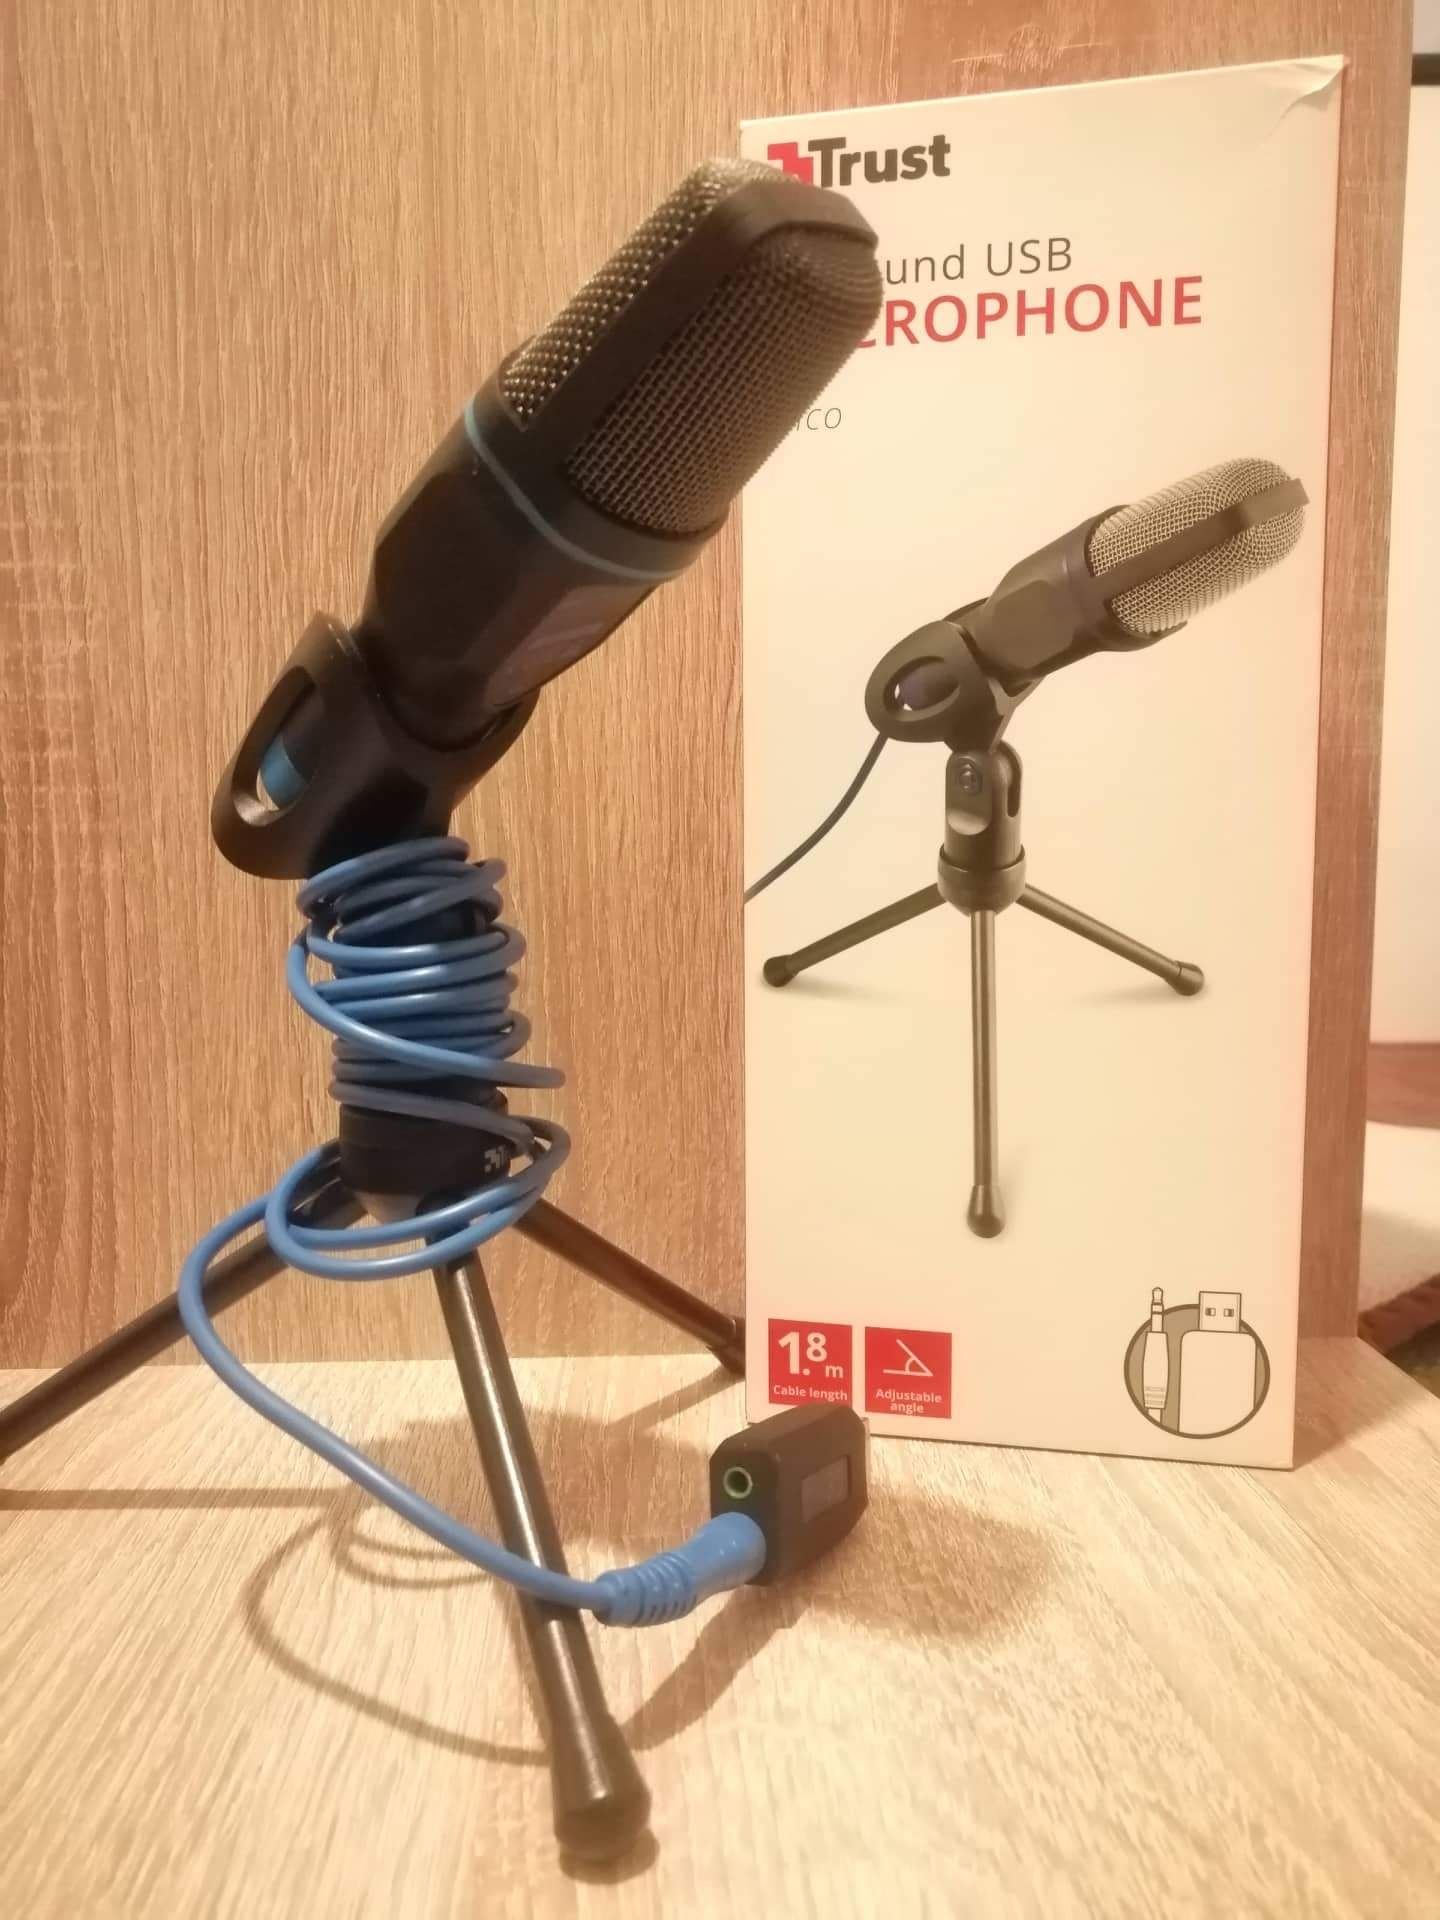 All-round USB microphone